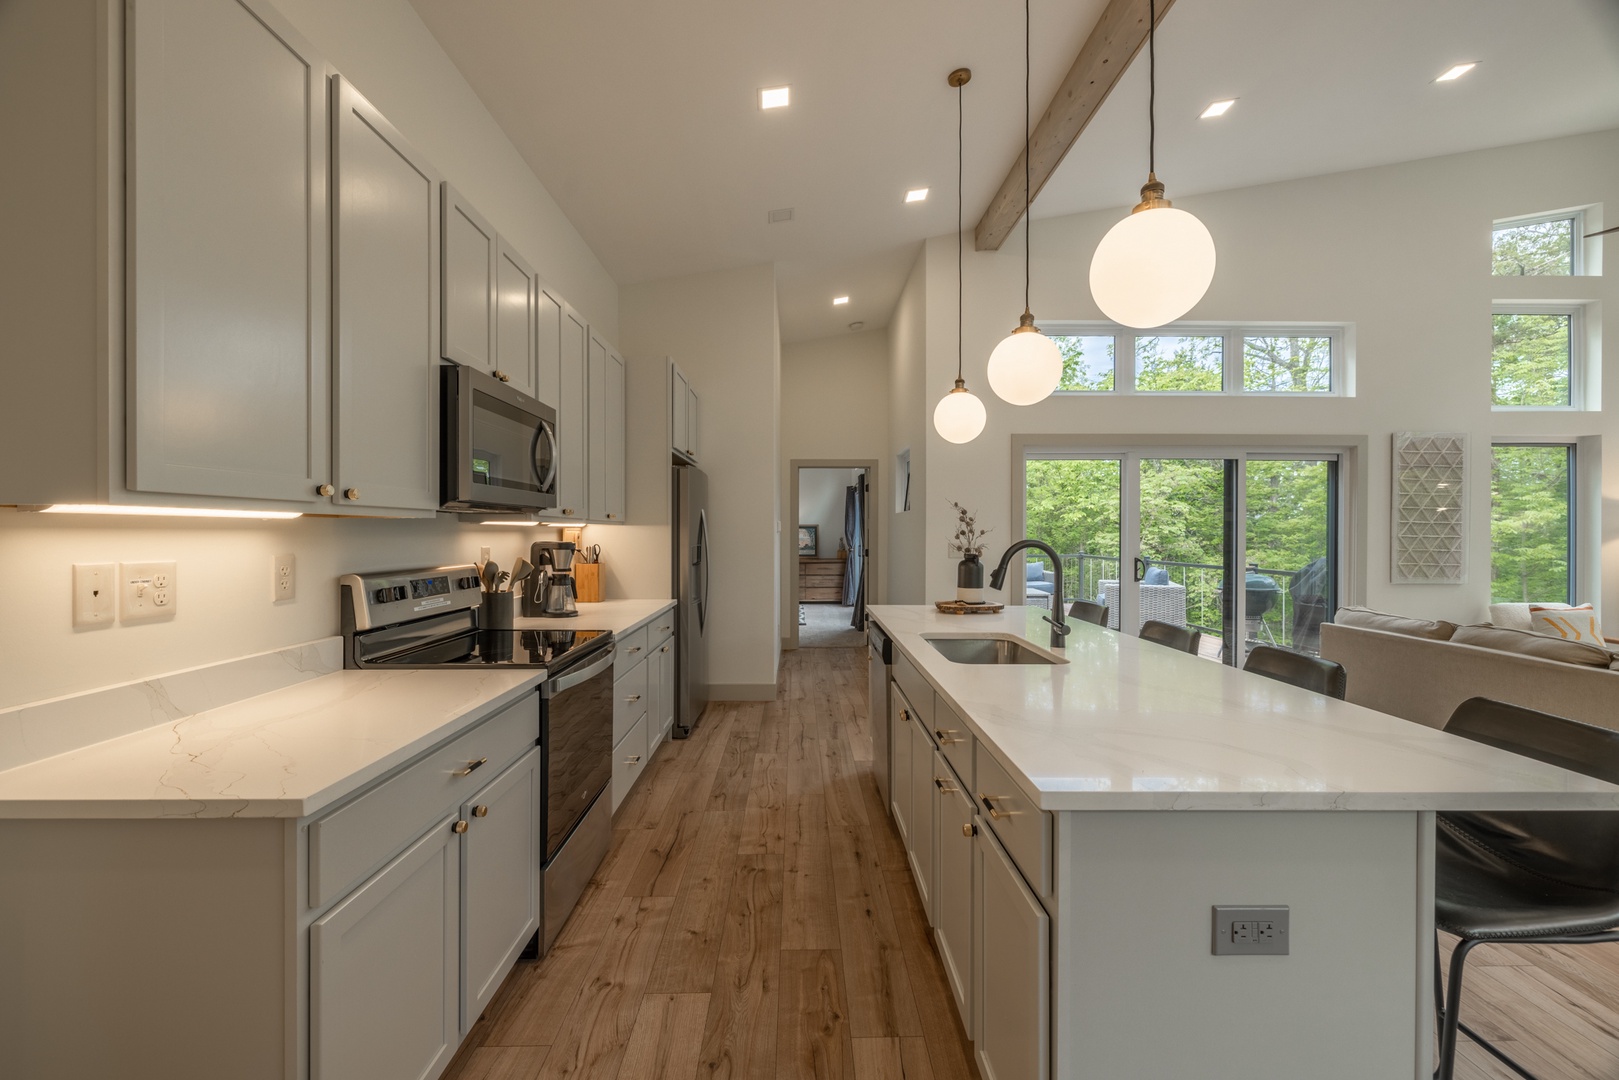 The fully equipped kitchen features beautiful quartz countertops, Whirlpool 30" electric range stove, 36" stainless steel side-by-side refrigerator with water and ice dispenser, heavy-duty dishwasher, microwave, and shaker style cabinets with soft close